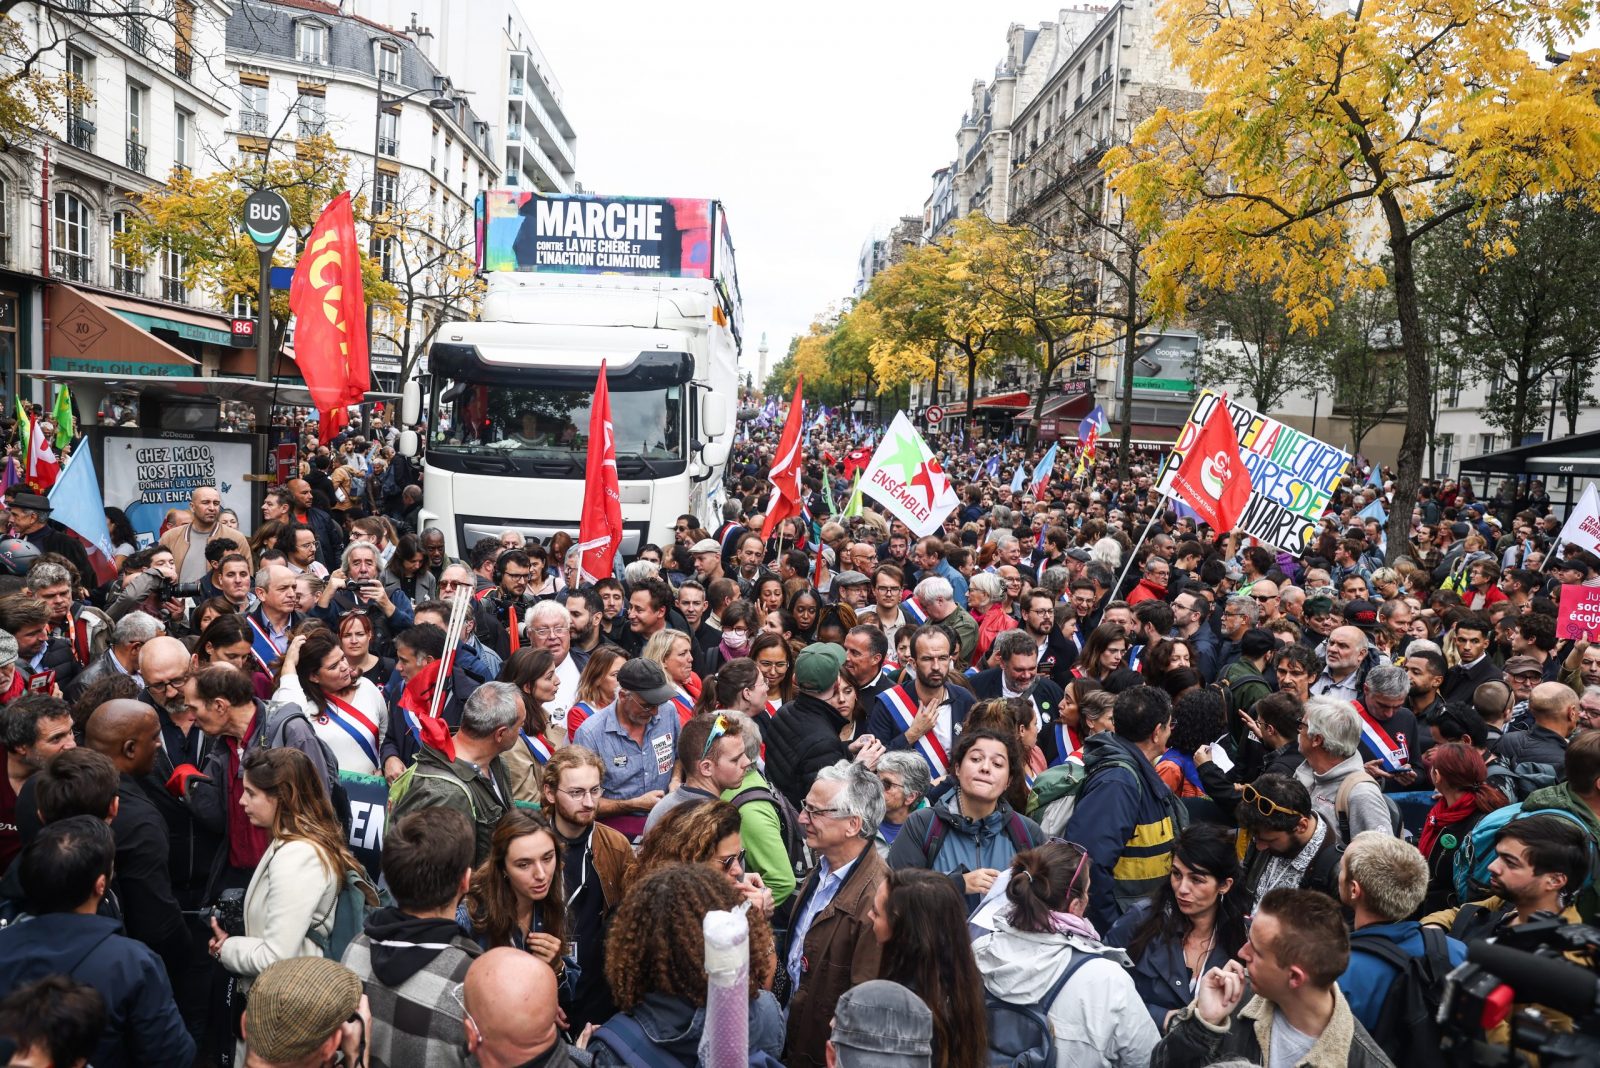 epa10247454 Protesters participate in a rally against rising prices in France, in Paris, France, 16 October 2022. La France Insoumise (LFI), French Socialist Party (PS), Europe-Ecologie Les Verts (EELV) and several trade unions including the General Confederation of Labor (CGT) called for a rally against the high cost of living and climate inaction on 16 October, and for a day of strike and interprofessional demonstrations on 18 October for a salary increase in France.  EPA/MOHAMMED BADRA